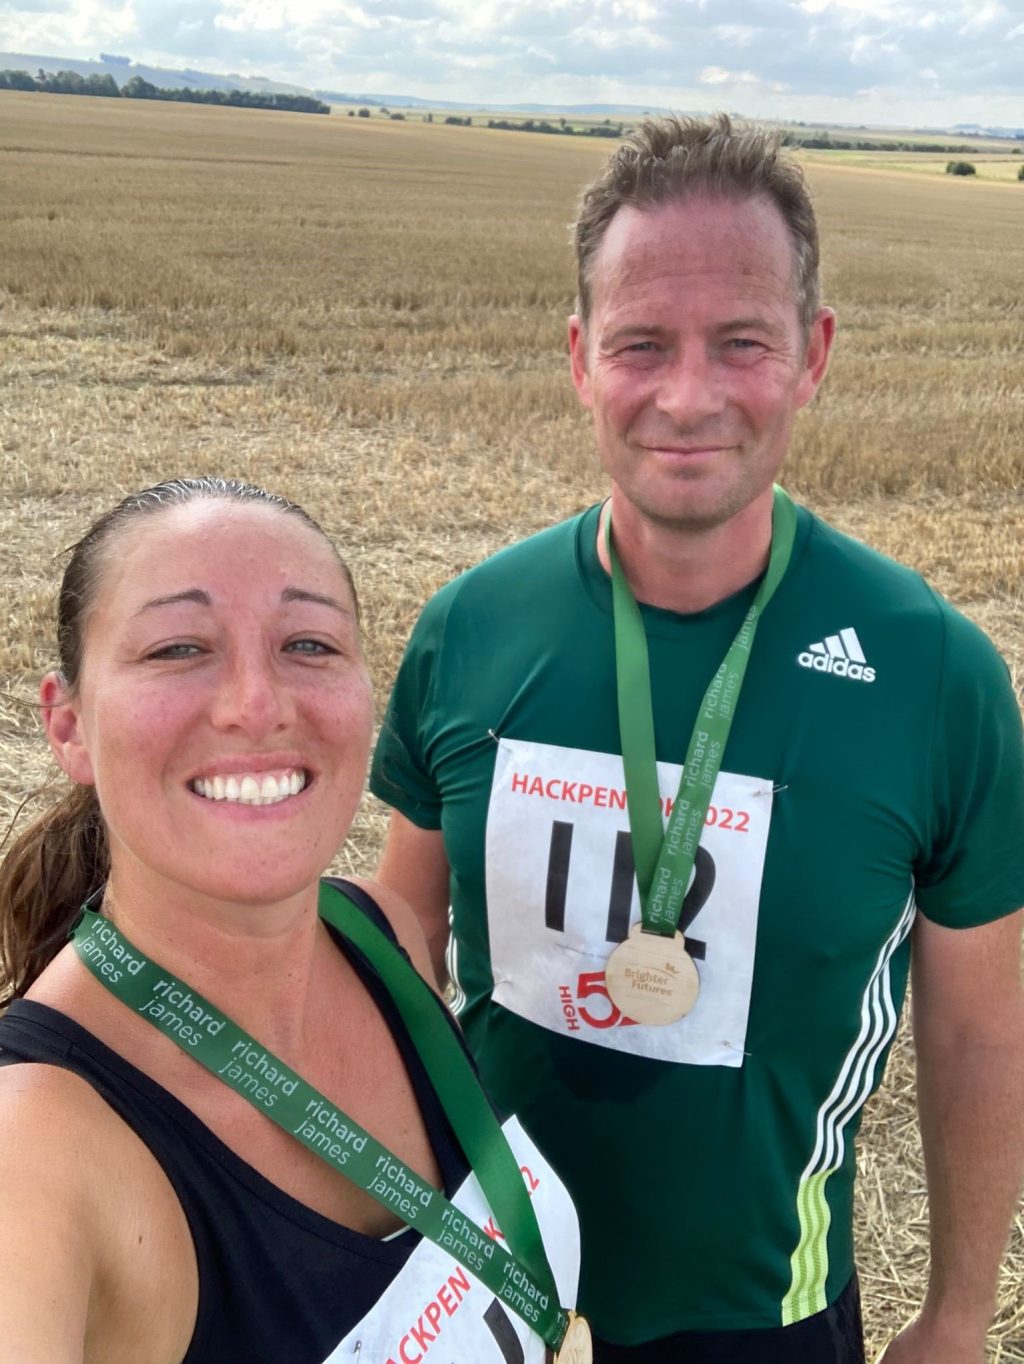 Photo of Kate Huggins and her partner after the brighter futures marathon with medals.